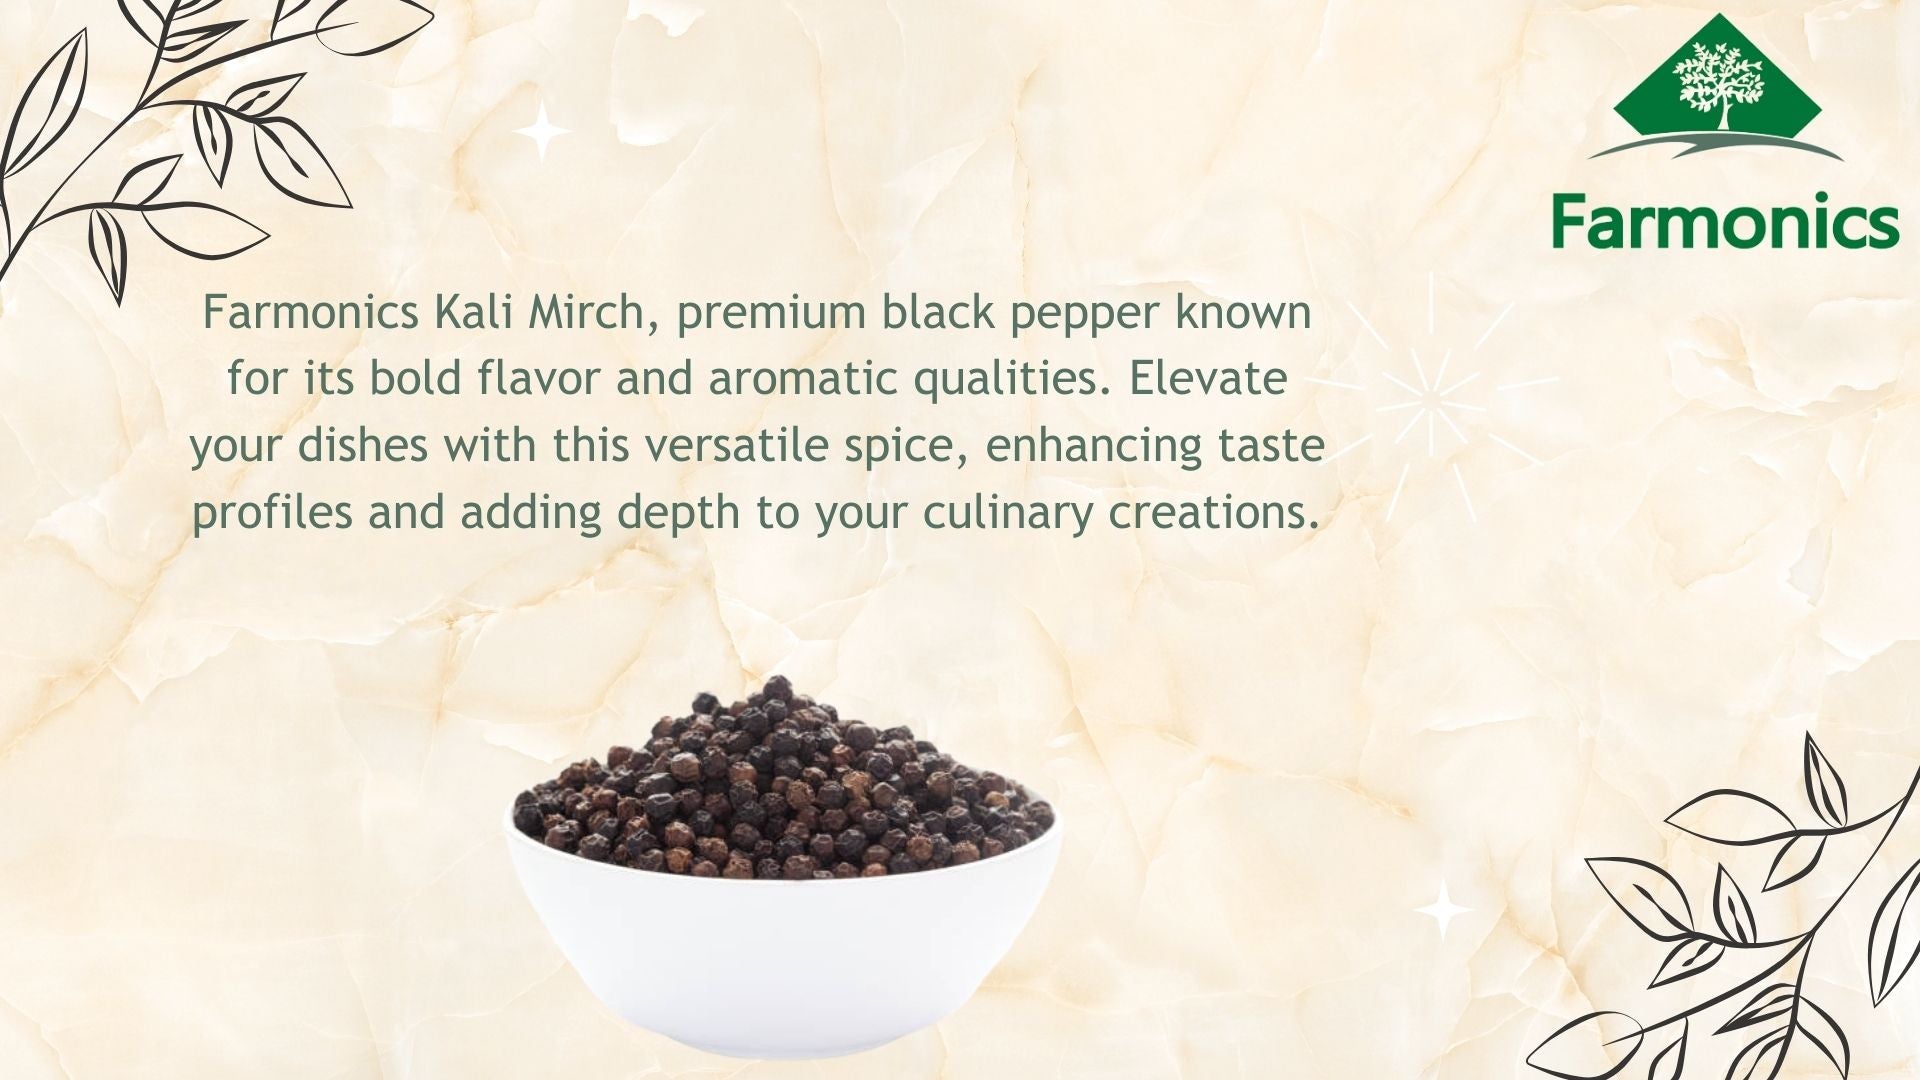 Here are some of the information about Best quality whole black pepper from Farmonics